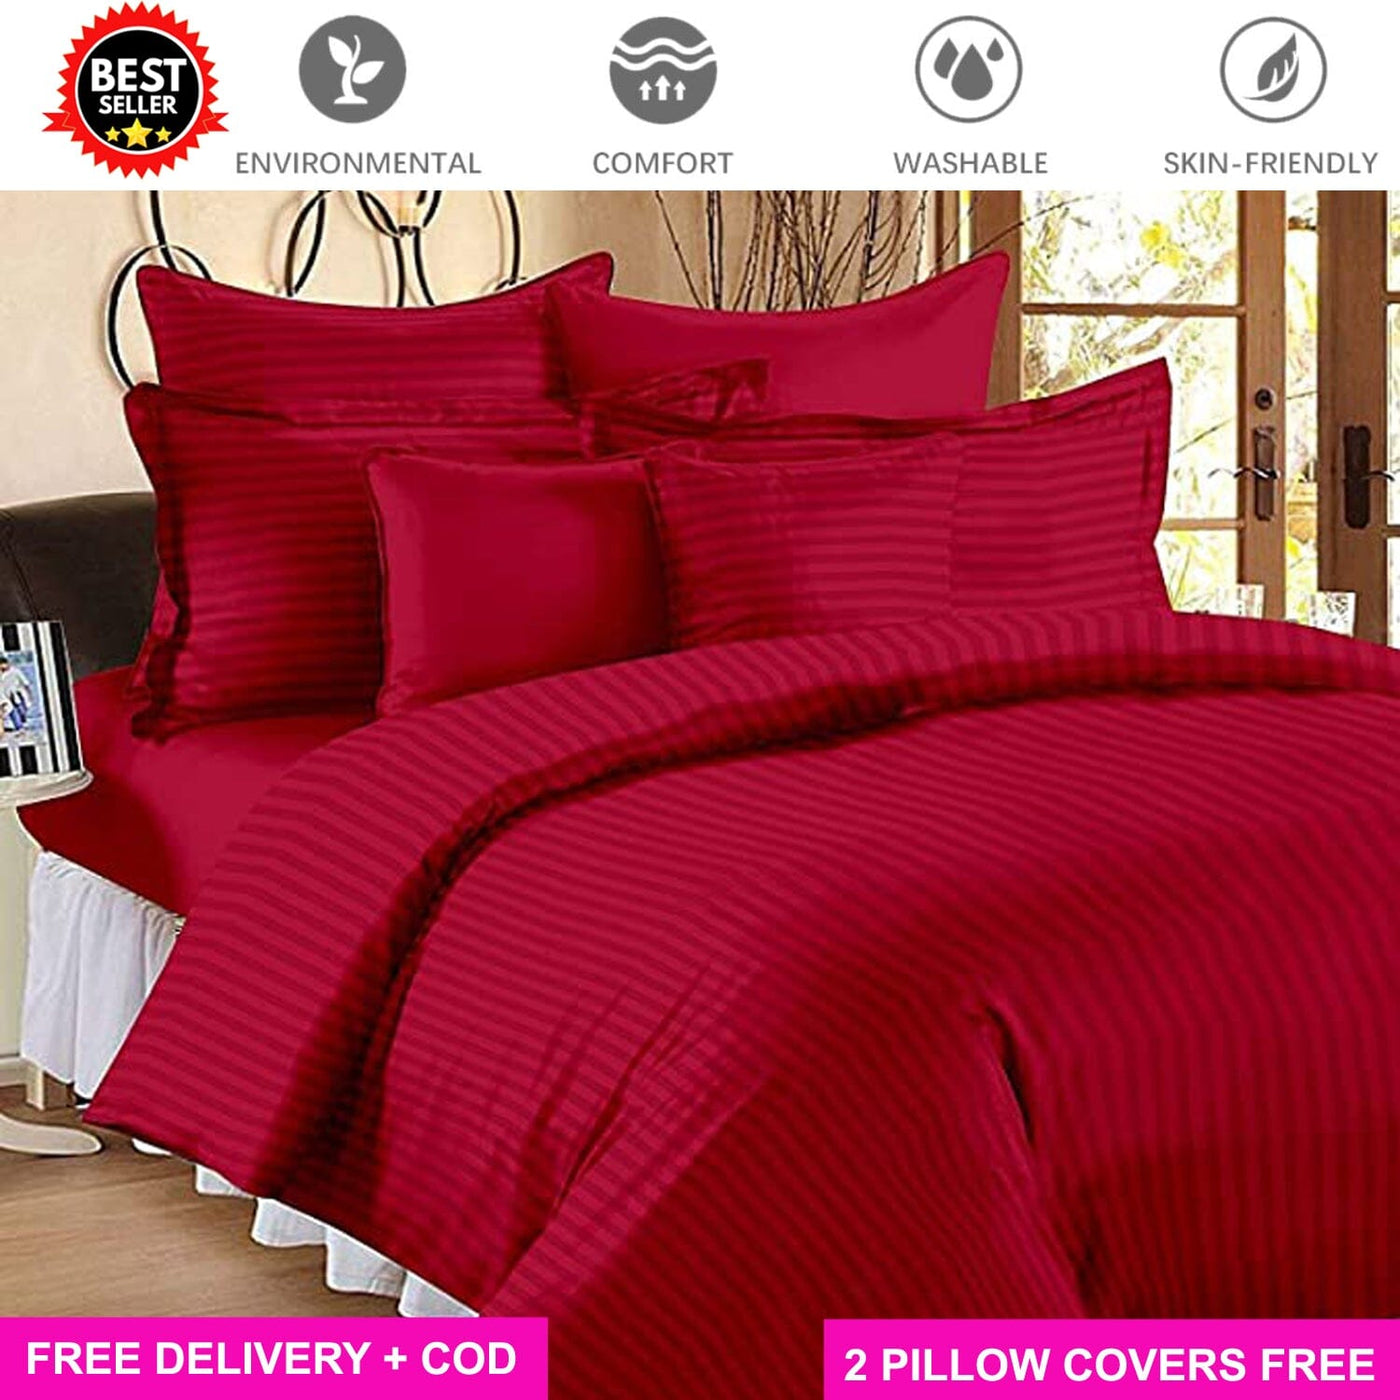 Satin Maroon Full Elastic Fitted Bedsheet with 2 Pillow Covers Bed Sheets Great Happy IN KING SIZE - ₹1299 